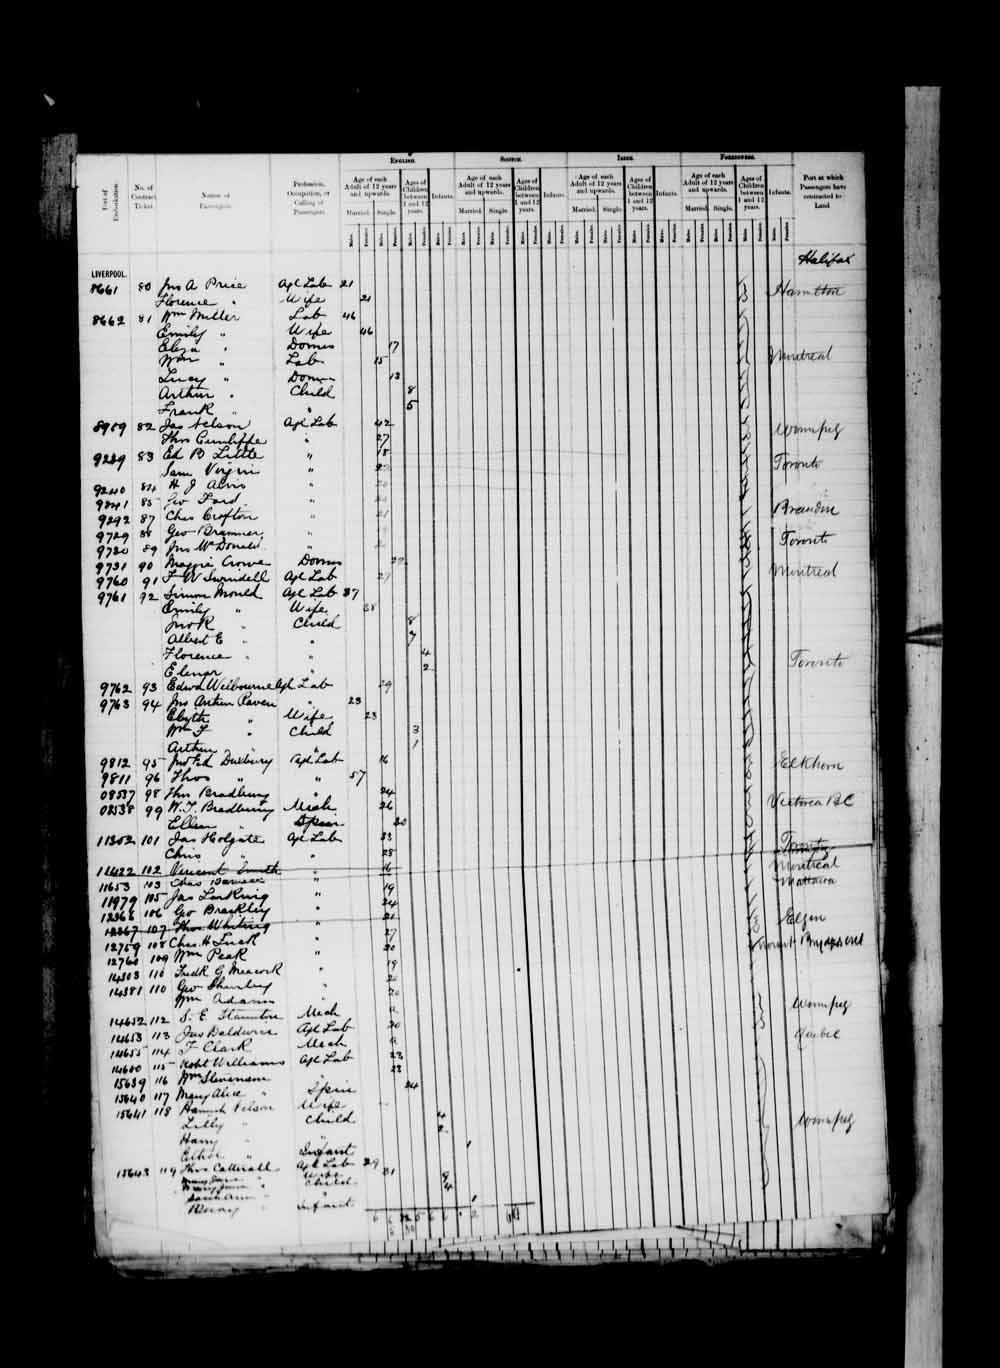 Digitized page of Passenger Lists for Image No.: e003674945